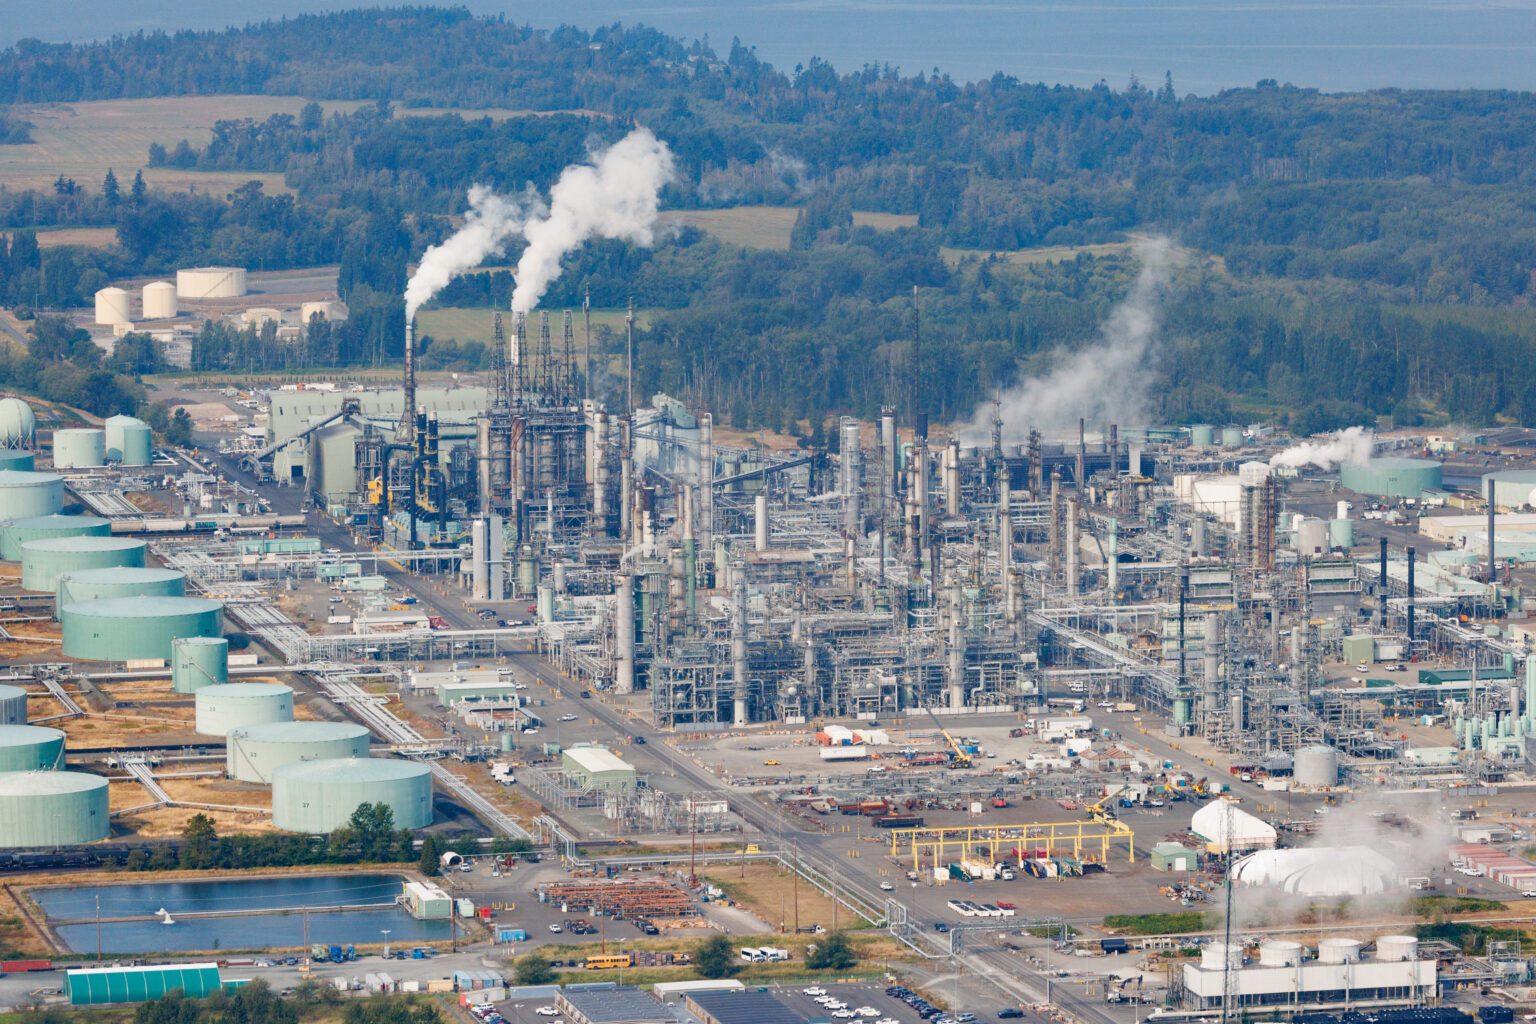 An aerial view of BP Cherry Point Refinery with smoke fumes coming out.